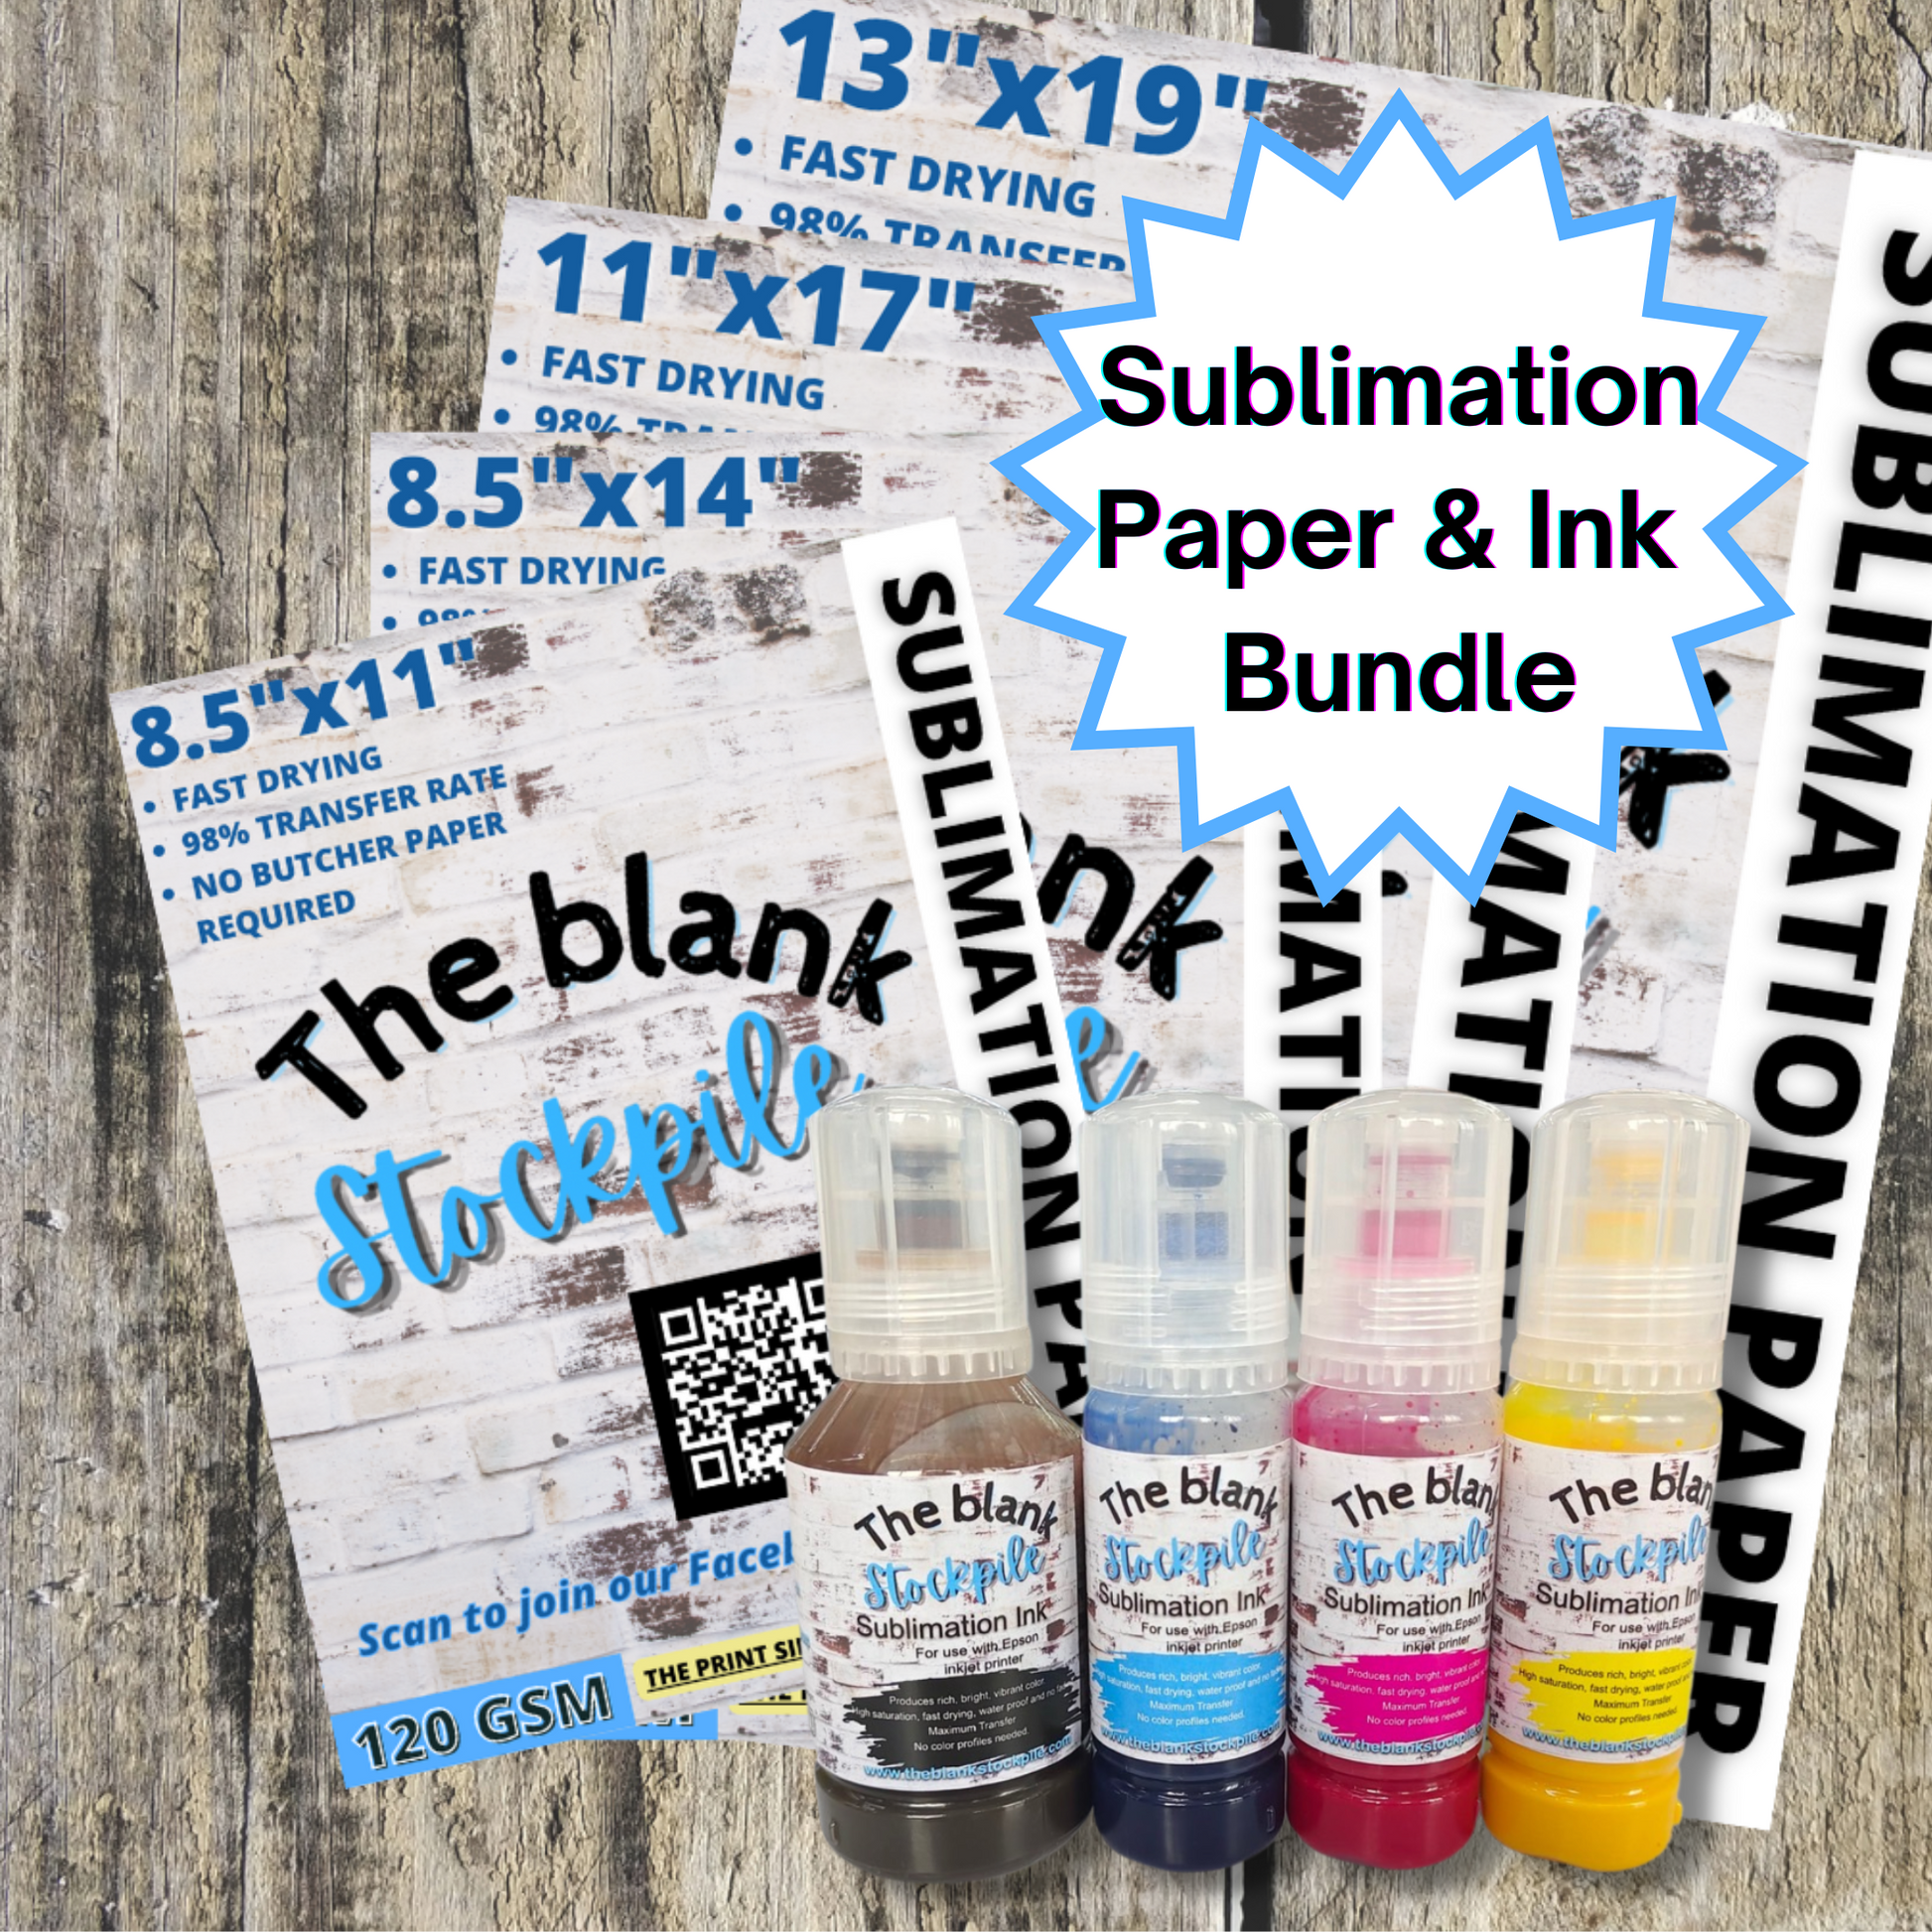 Mugsie | 11 x 17 Sublimation Paper for Any Inkjet Printer with Sublimation Ink - 100 Sheets